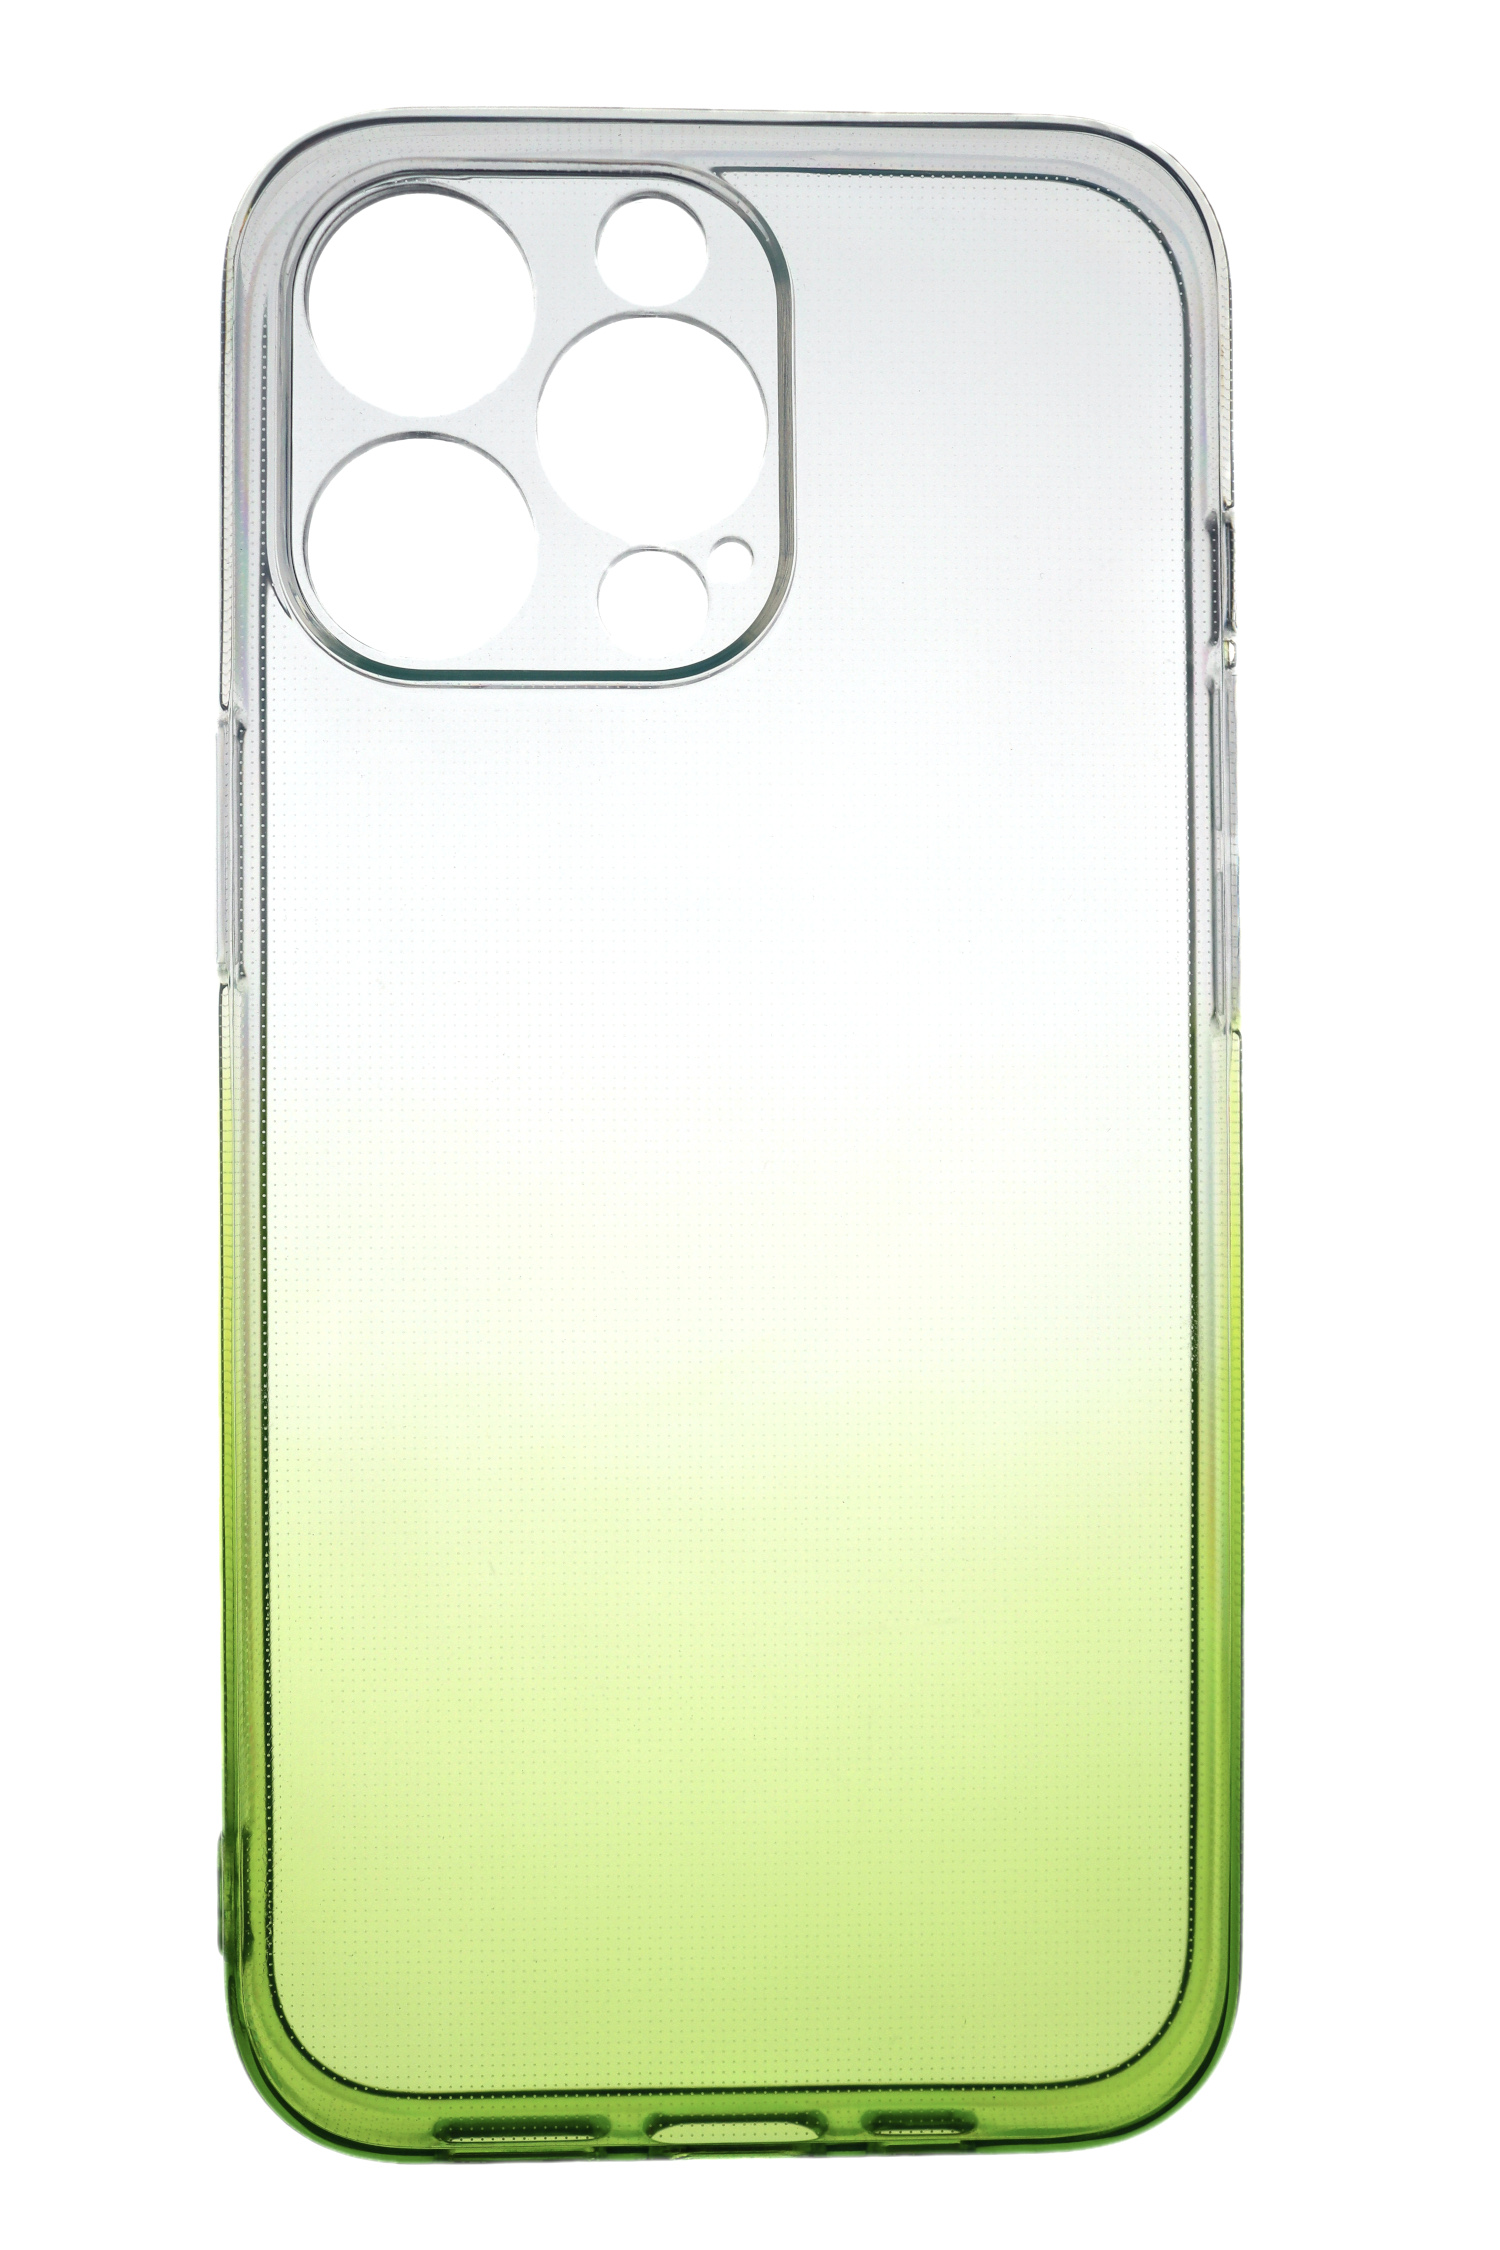 JAMCOVER 2.0 mm TPU Pro, Backcover, 13 Grün, Strong, Case Transparent Apple, iPhone